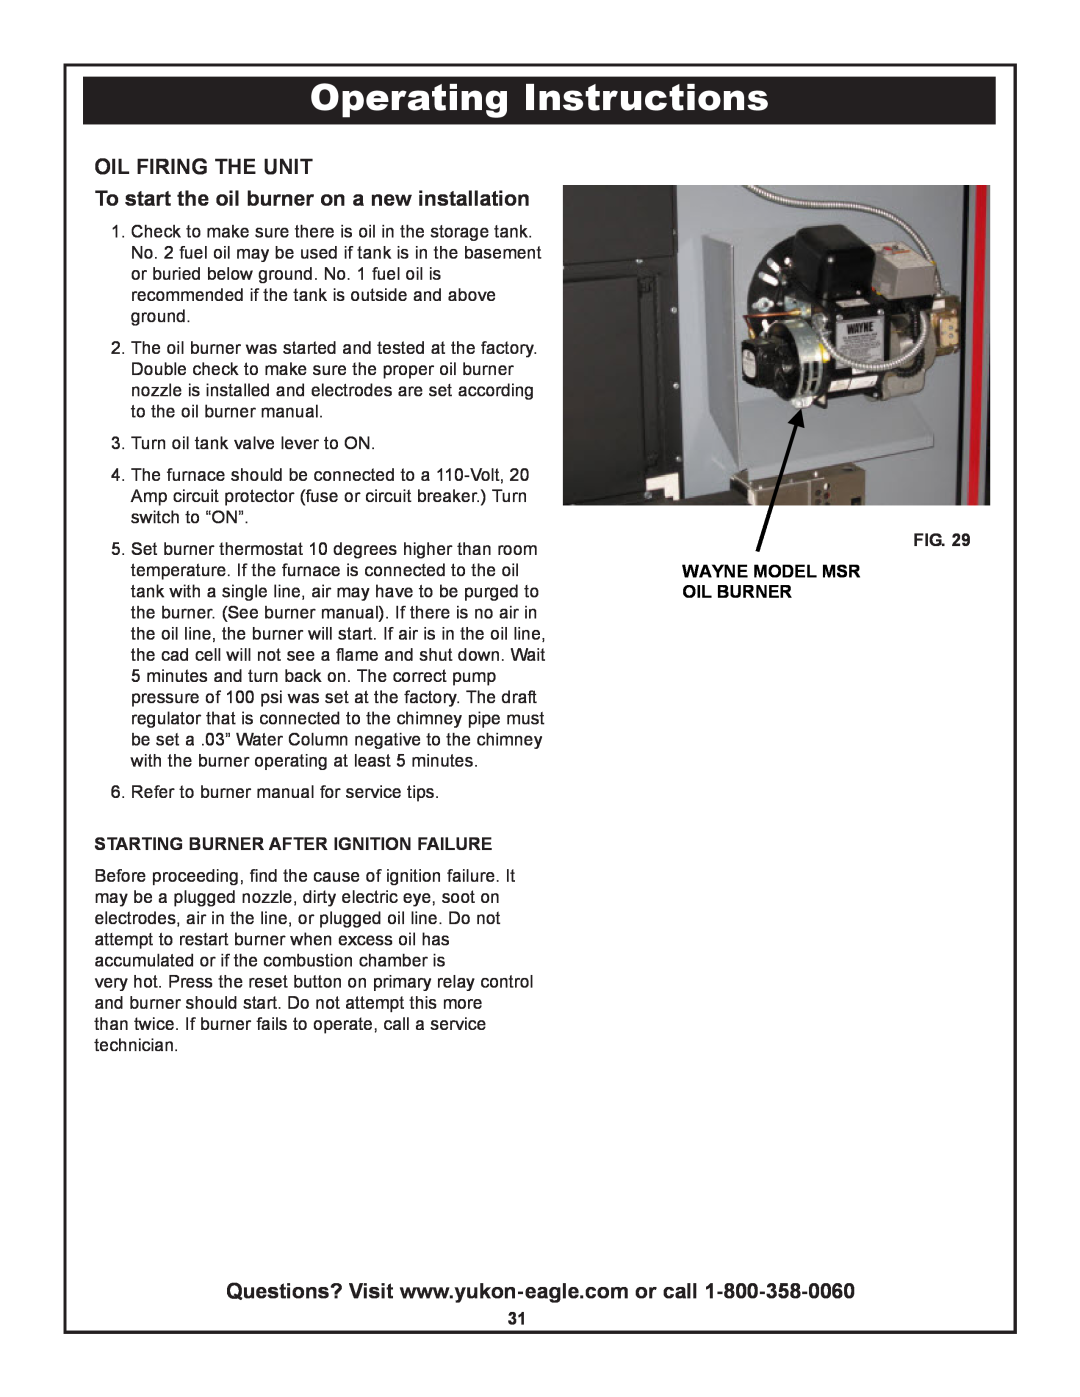 Yukon Advanced Optics Oil Furnace Operating Instructions, Oil Firing The Unit, Starting Burner After Ignition Failure, Fig 